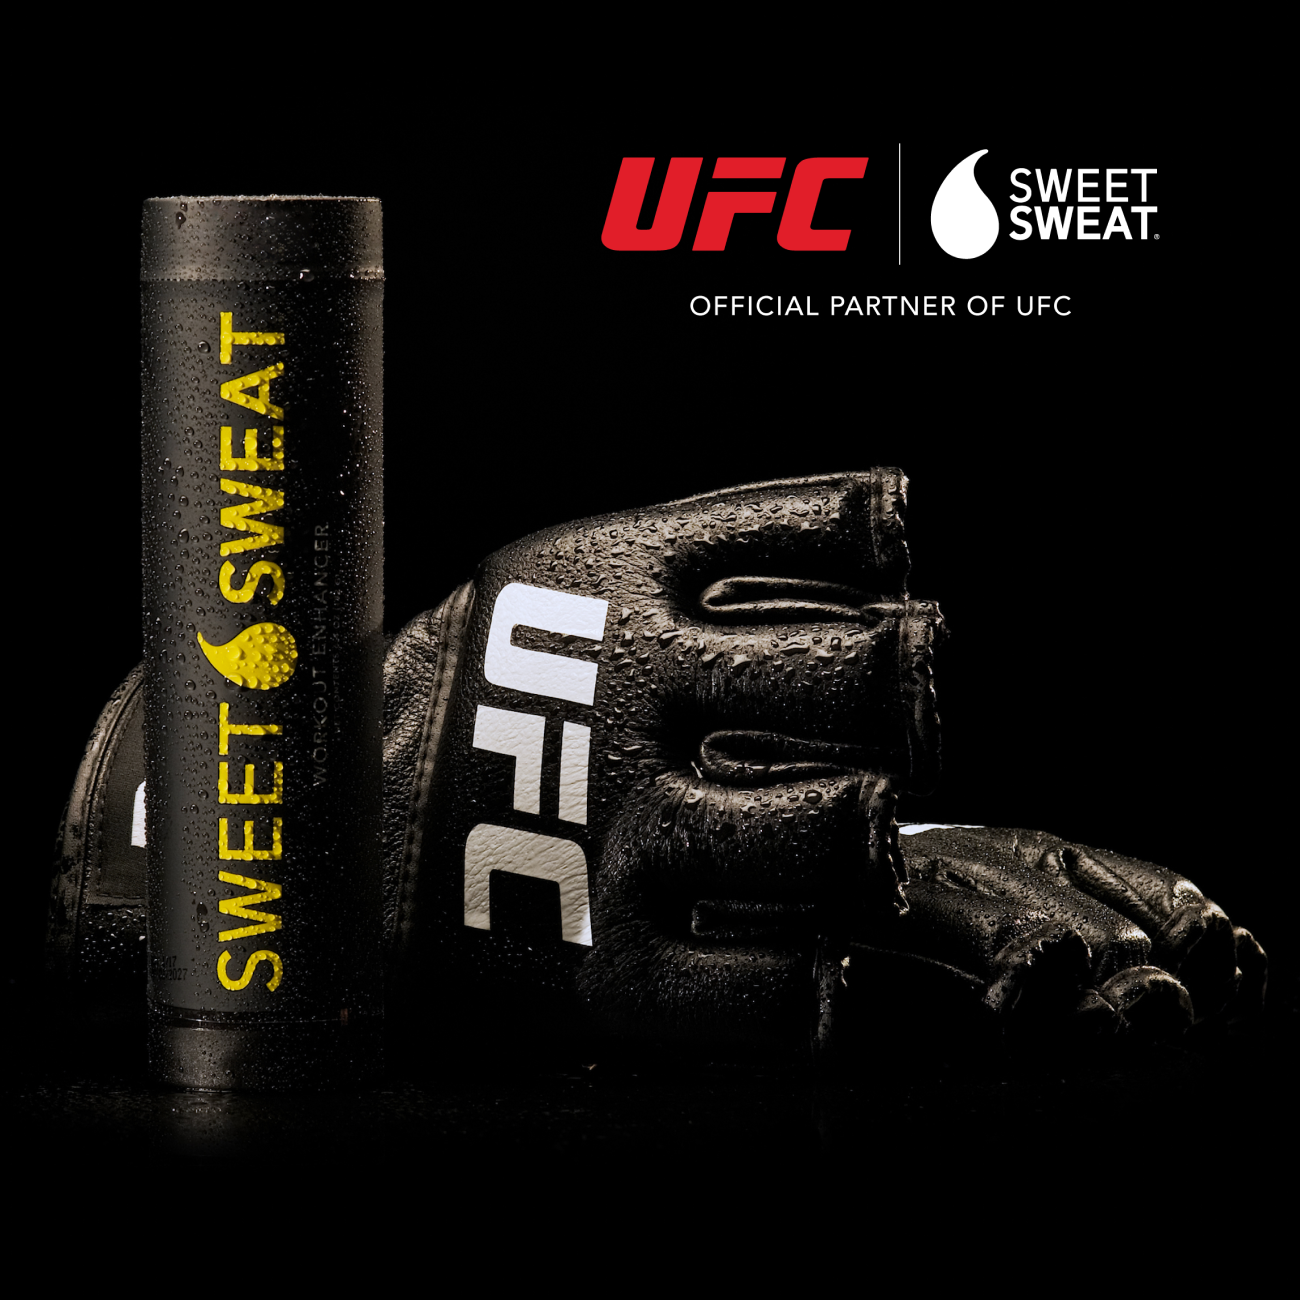 UFC Gloves and Stick